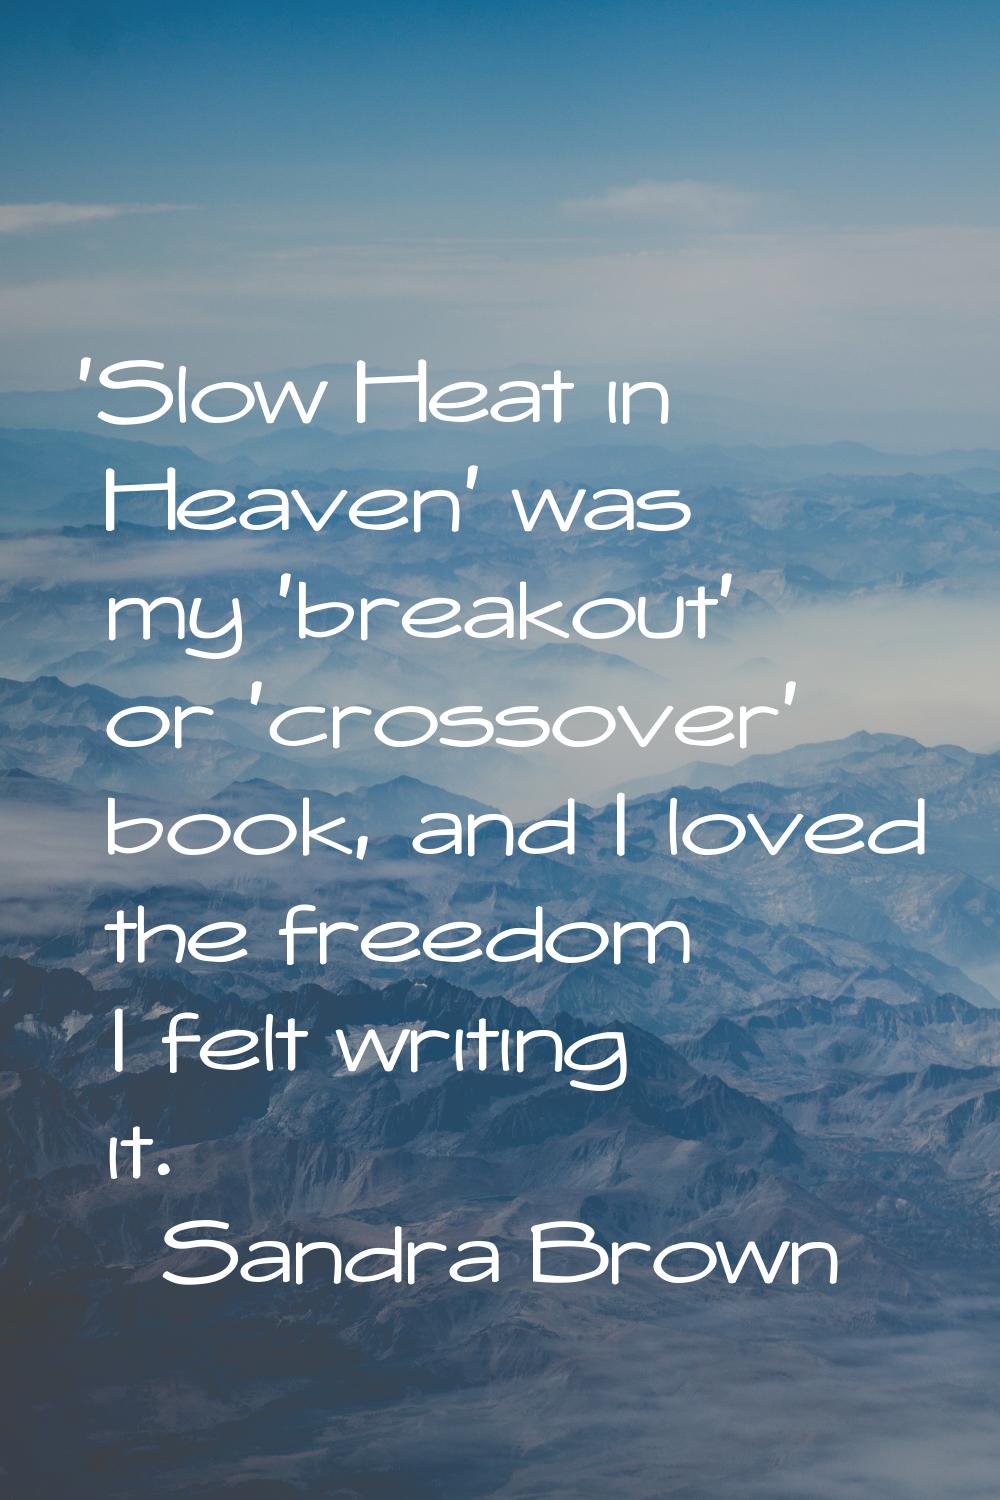 'Slow Heat in Heaven' was my 'breakout' or 'crossover' book, and I loved the freedom I felt writing